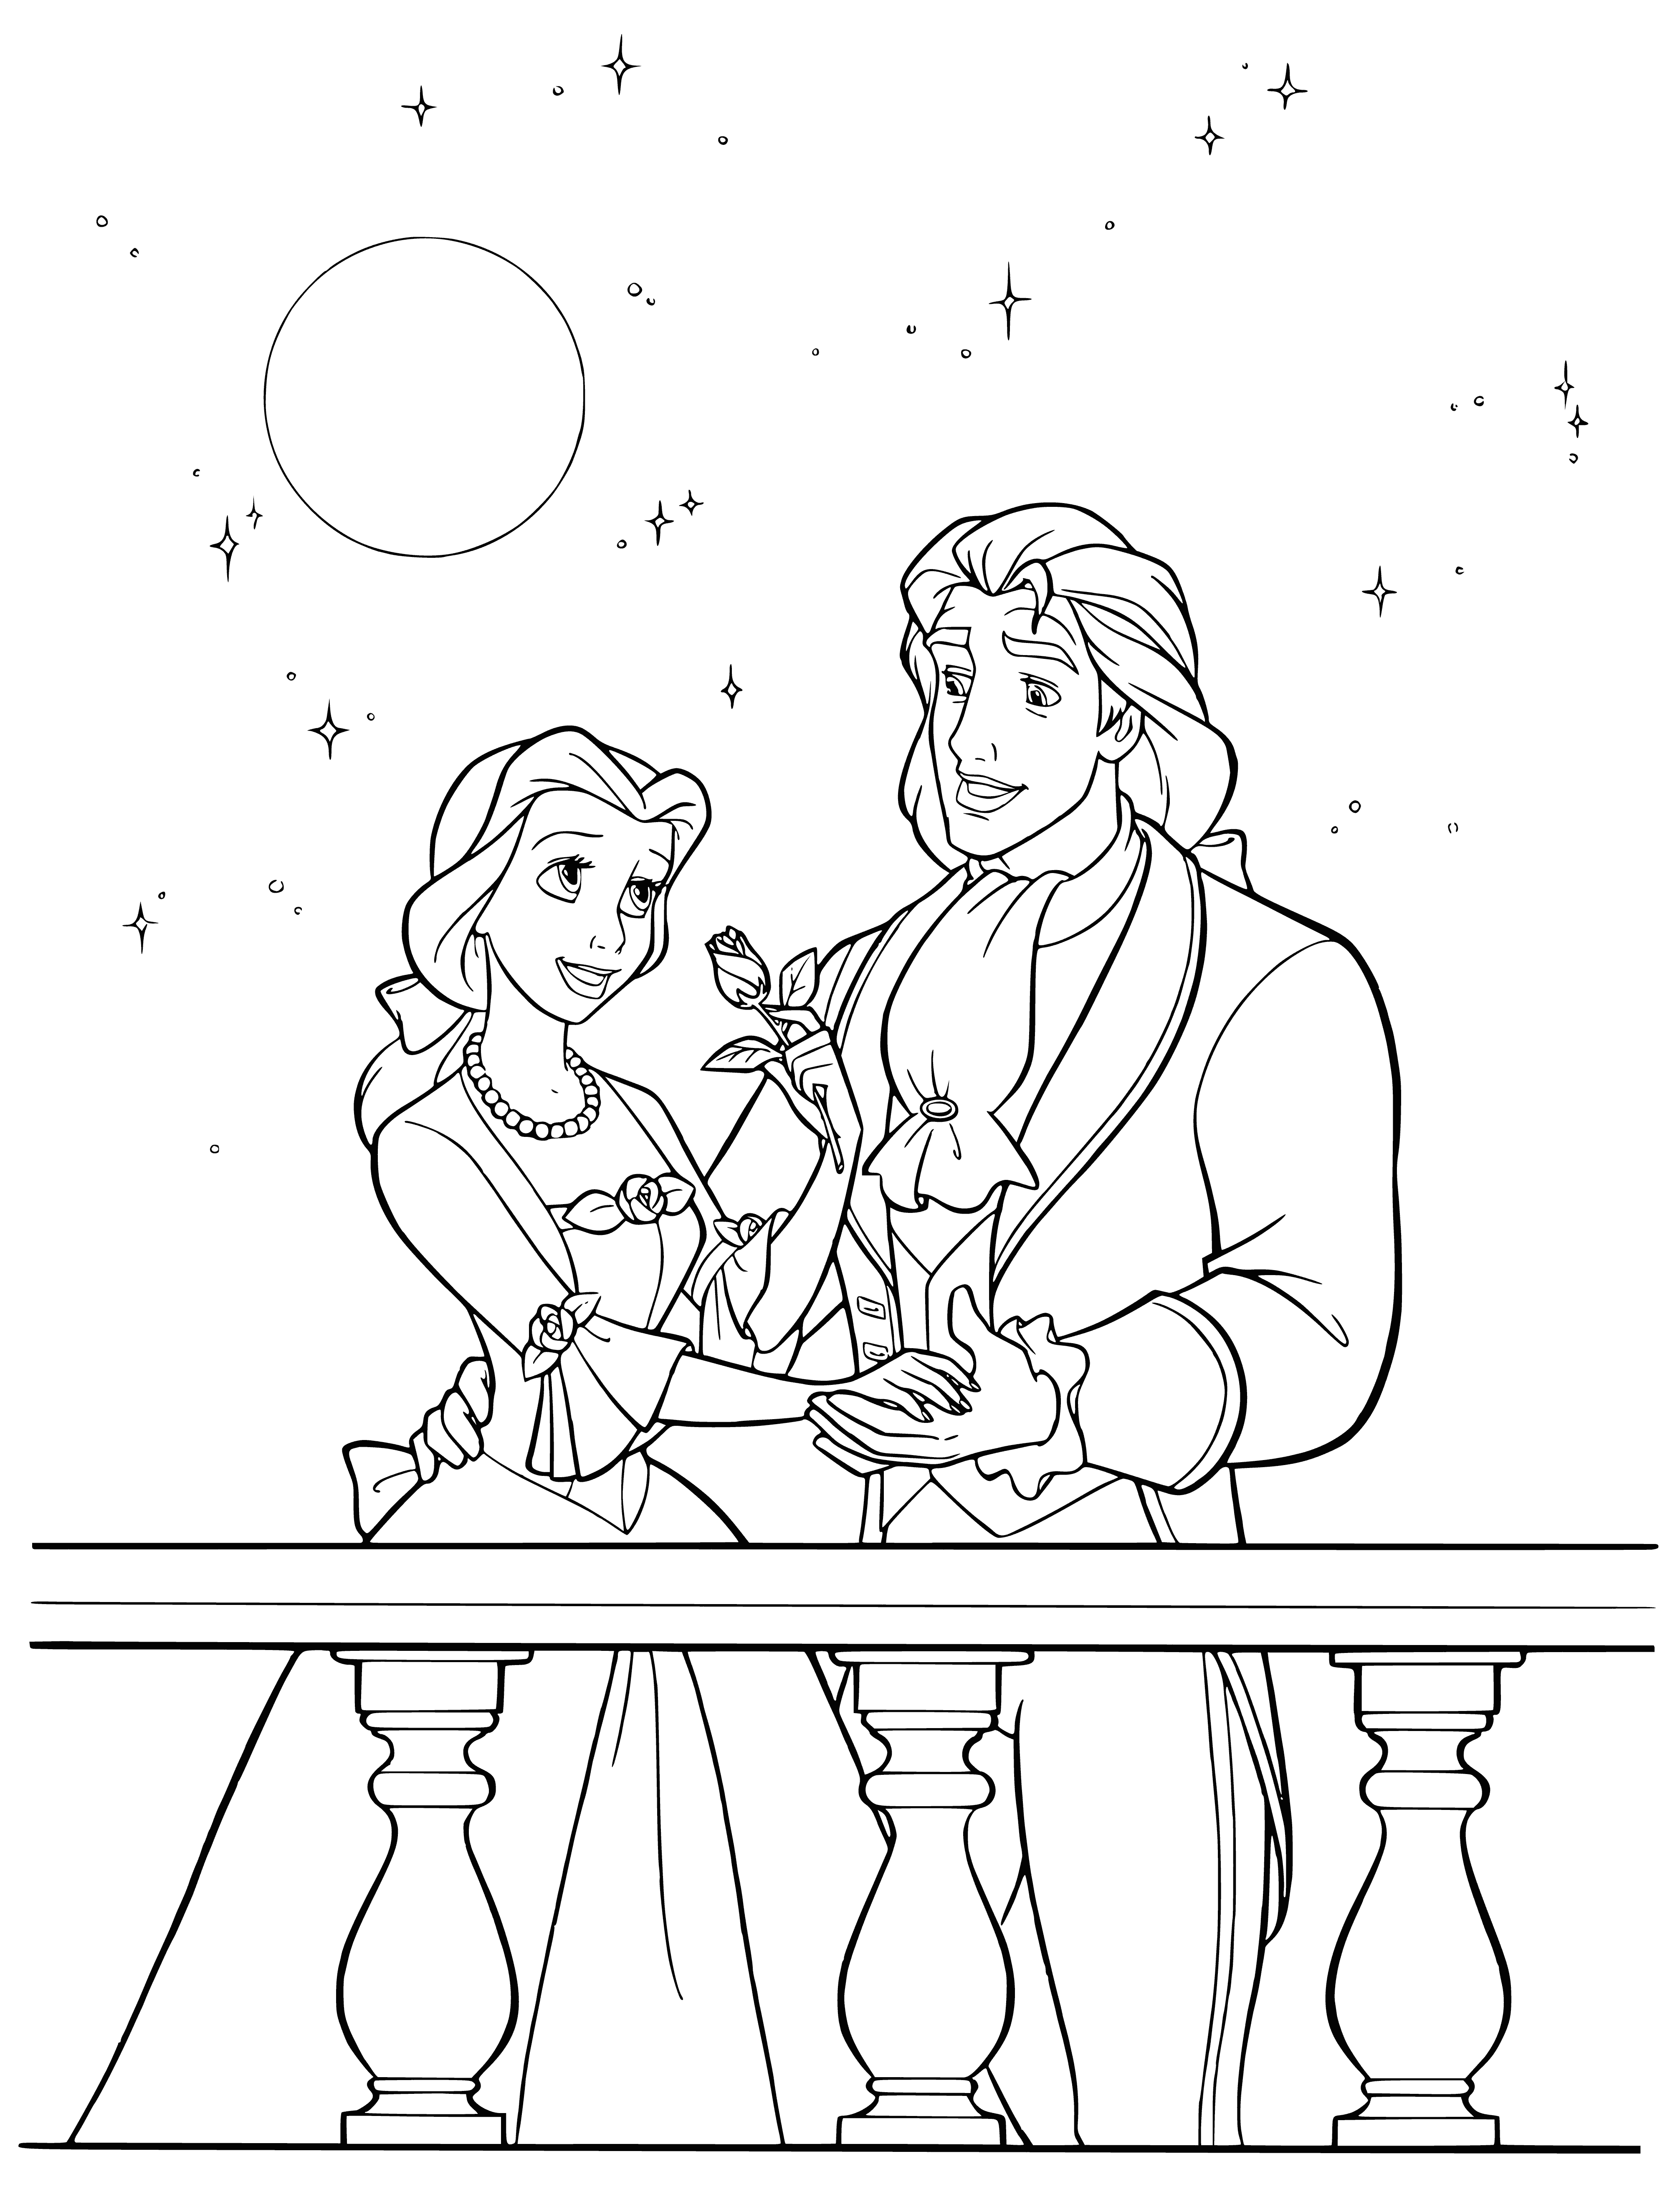 coloring page: Prince stands before the beast, handing him a key to the now open castle door, sunlight streaming in.